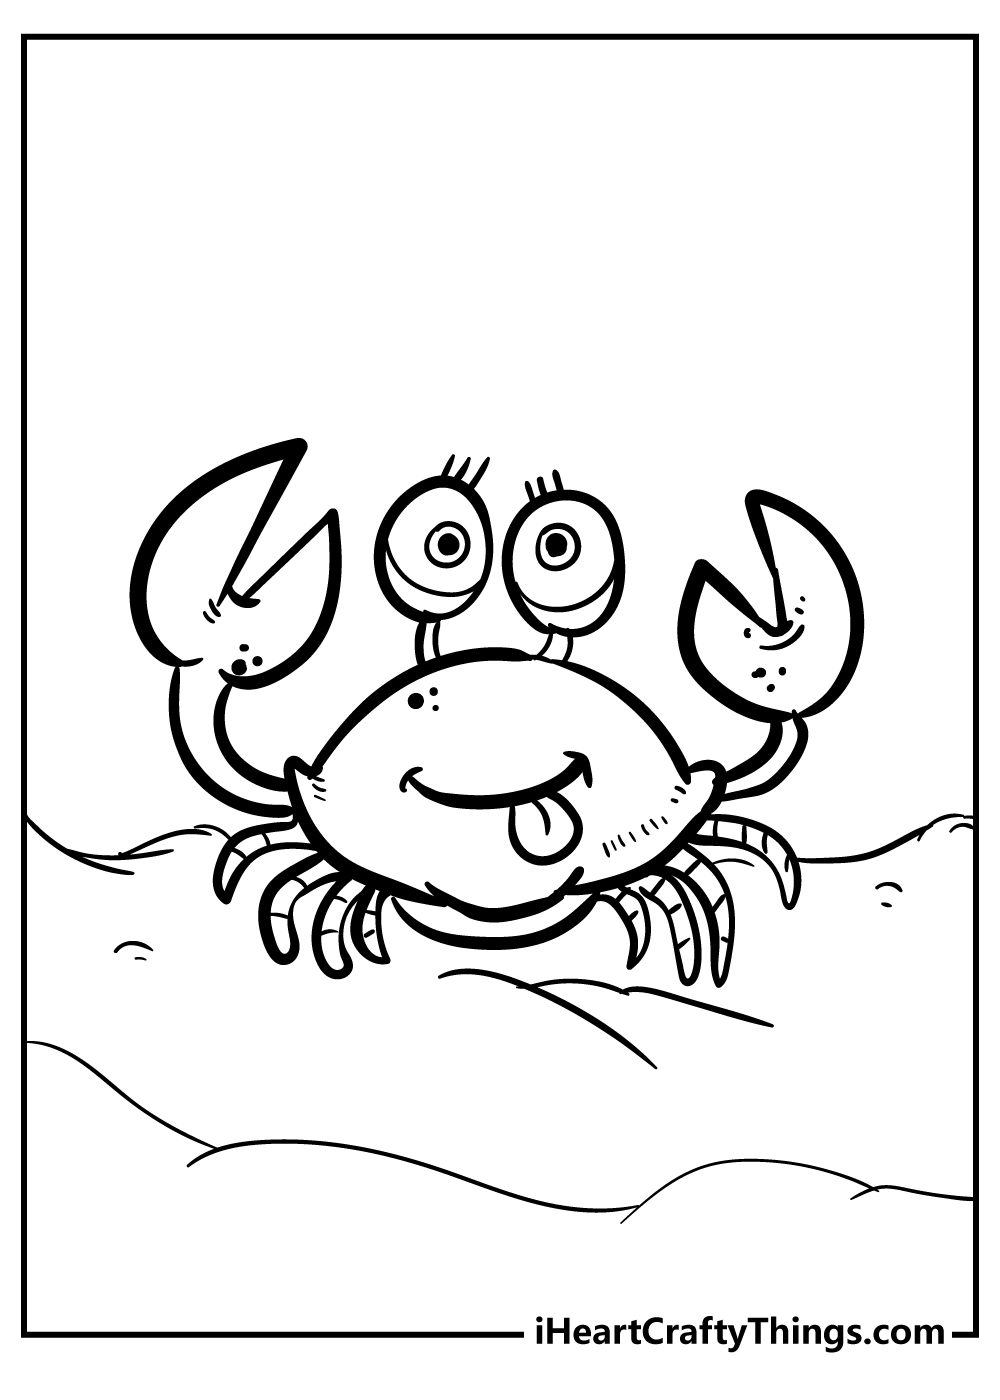 Crab coloring pages free printables